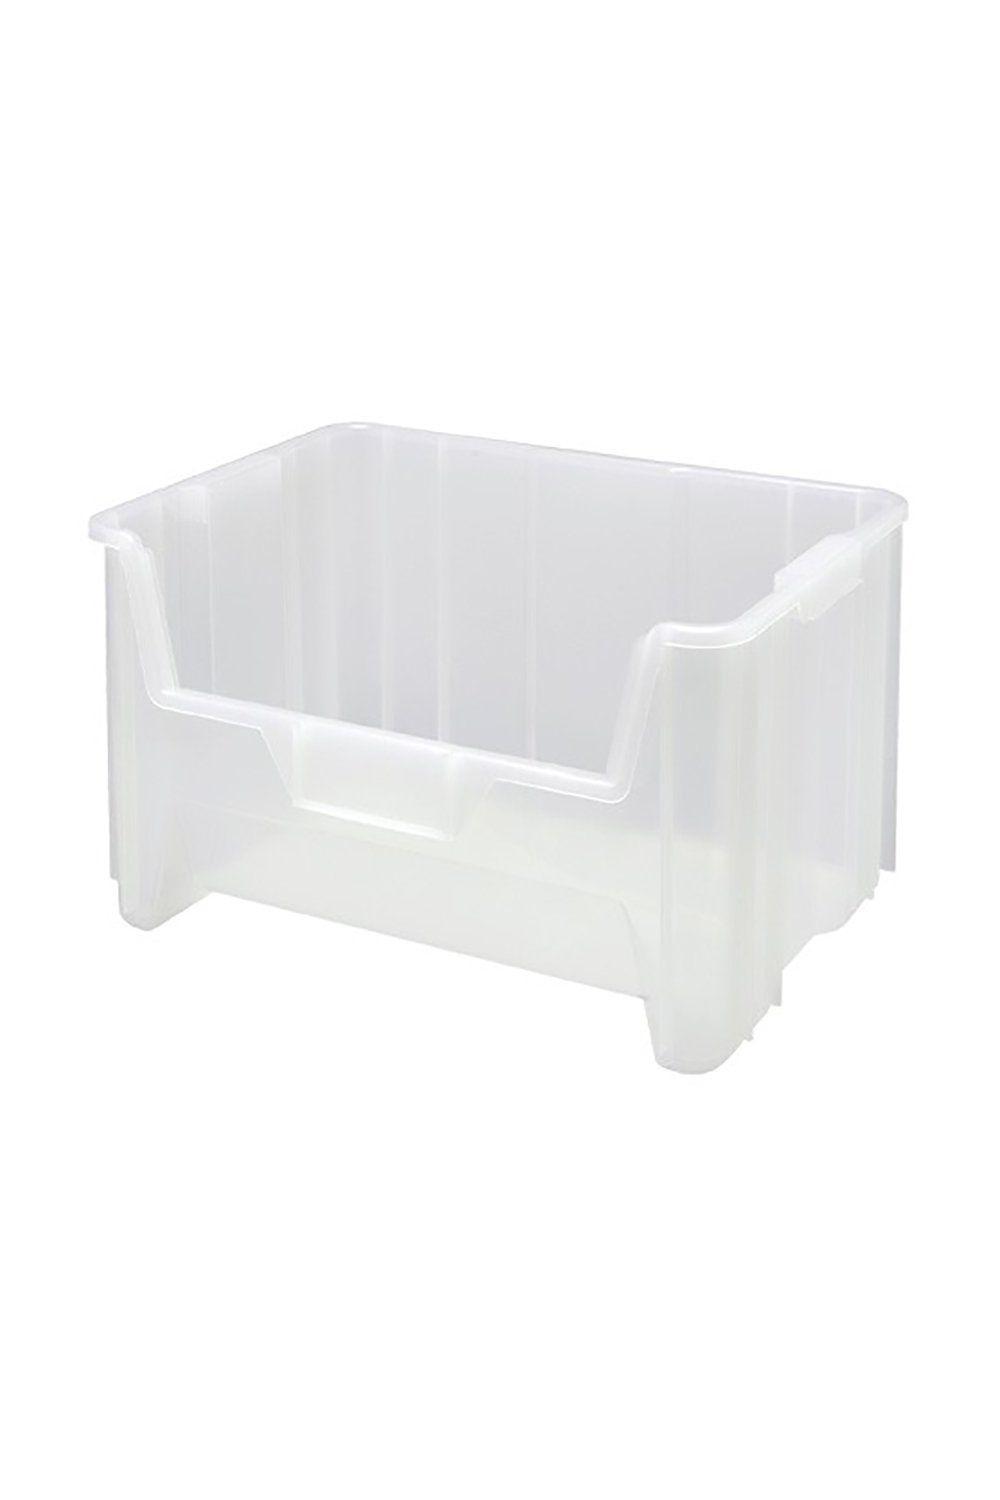 Clear View Giant Stack Container Bins & Containers Acart Equipment 15-1/4"L x 19-7/8"W x 12-7/16"H Clear 